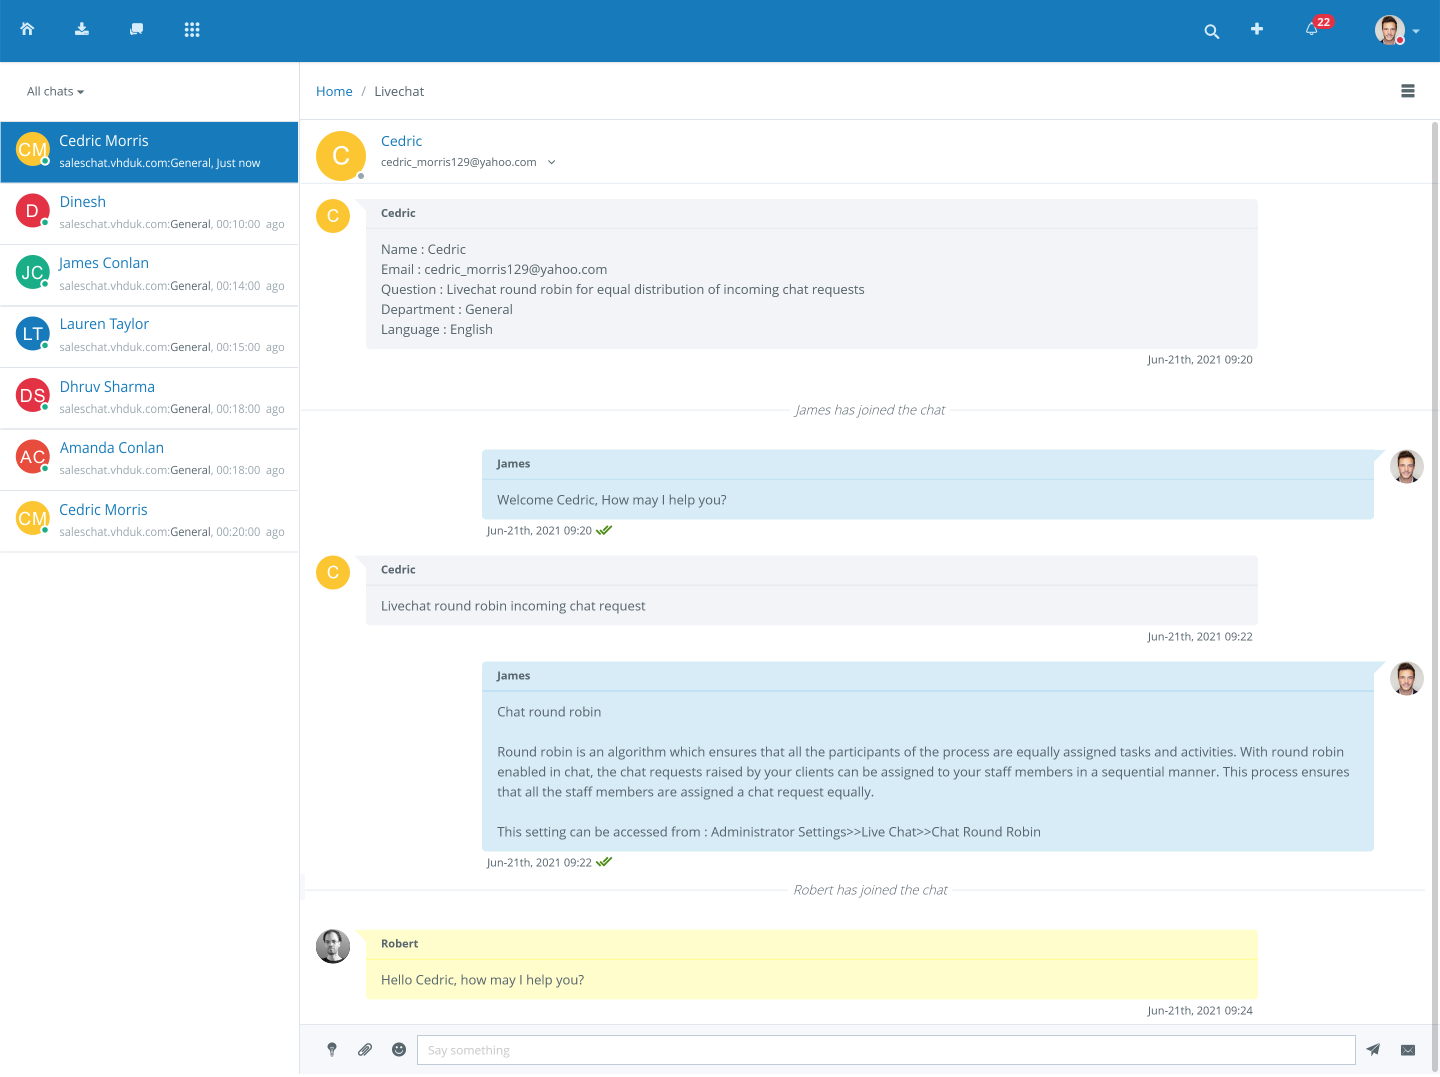 Vision Helpdesk's Live Chat Software